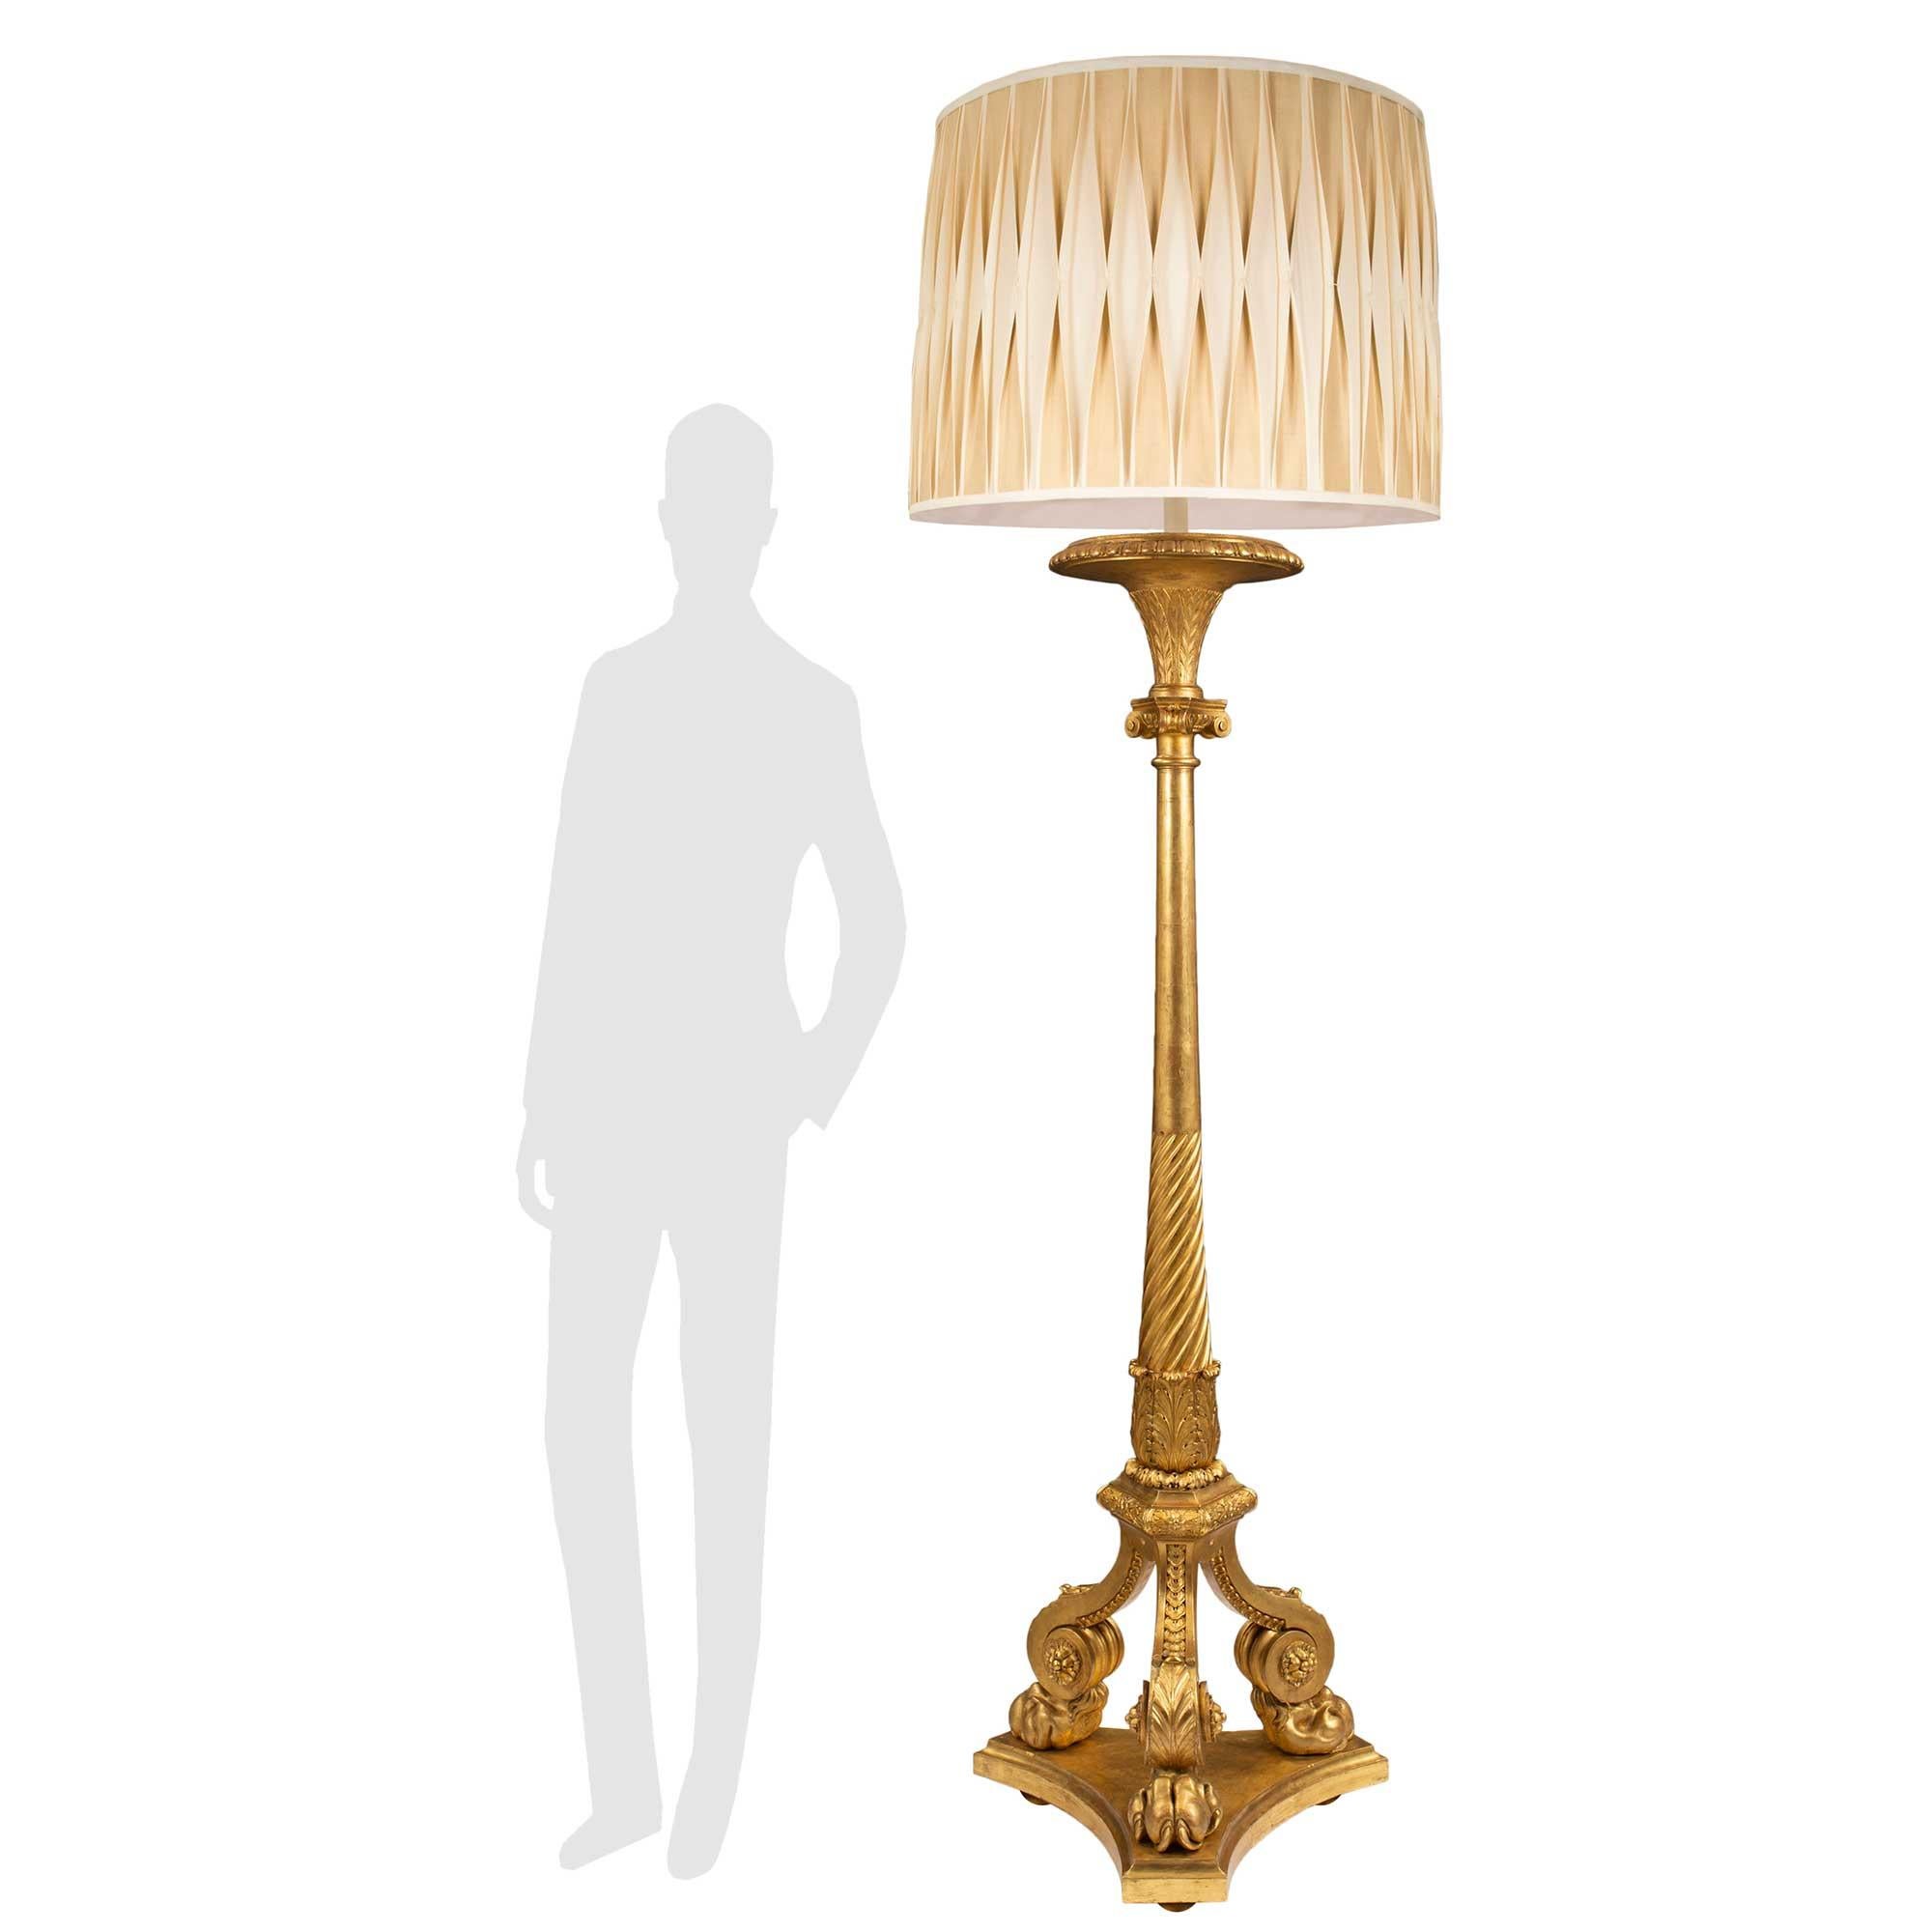 French Louis XVI St. Mid 19th Century Giltwood Floor Lamp In Good Condition For Sale In West Palm Beach, FL